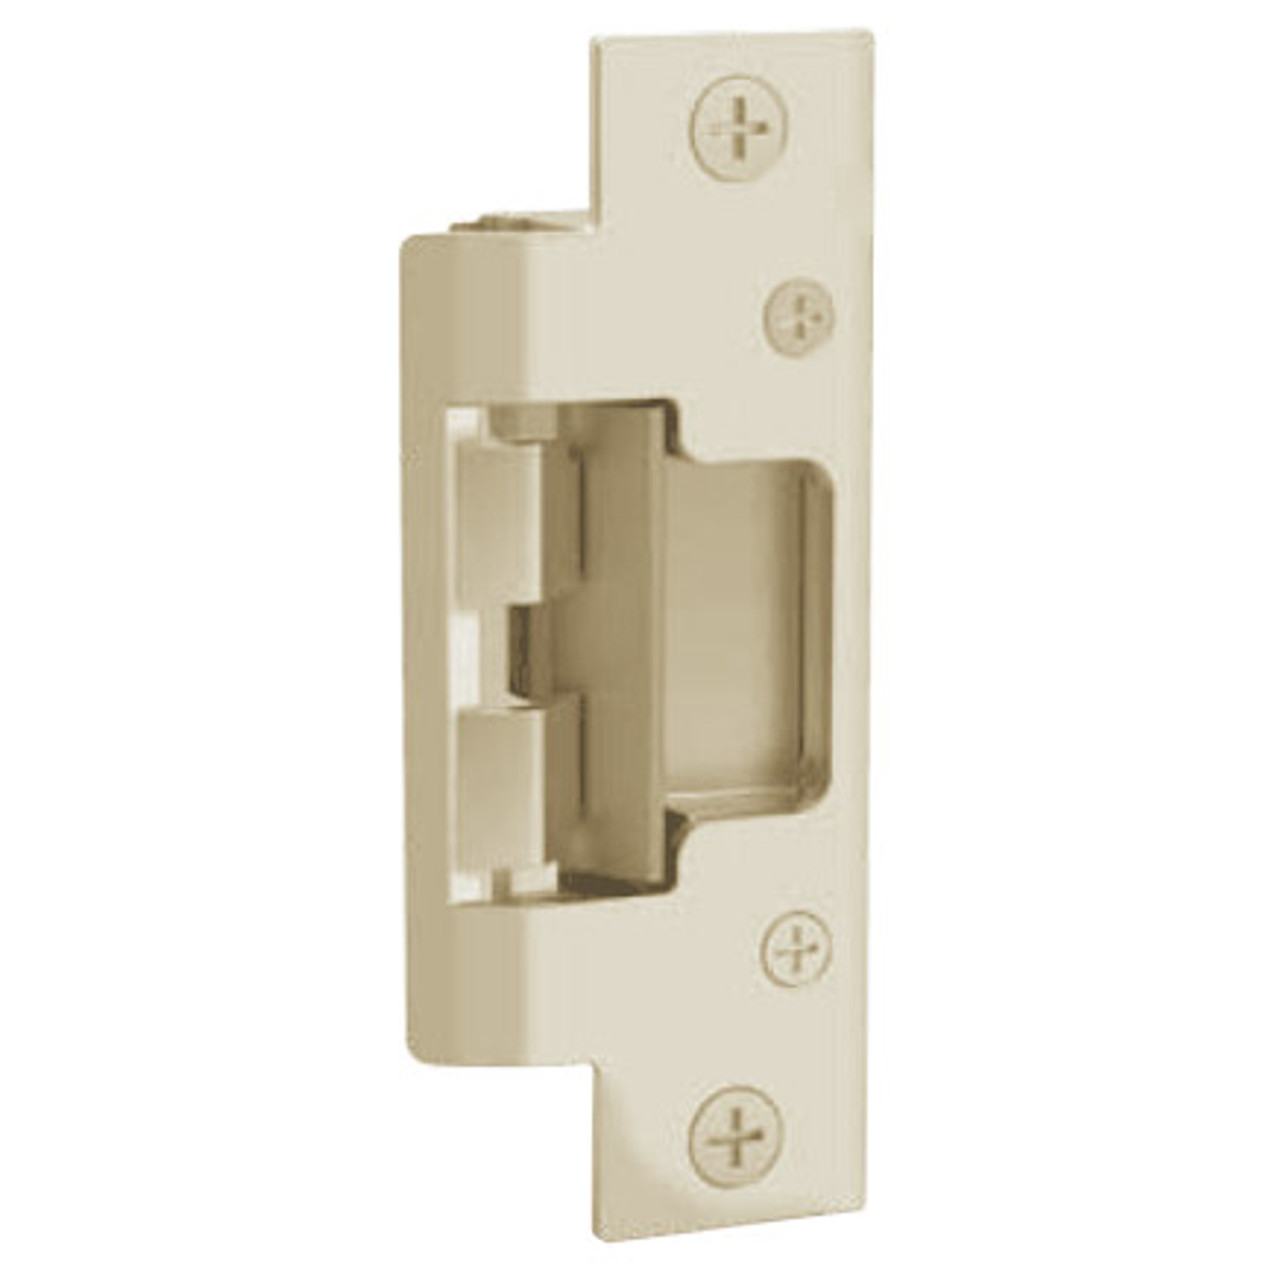 801-606 Hes 4-7/8" x 1-1/4" Faceplate in Satin Brass Finish